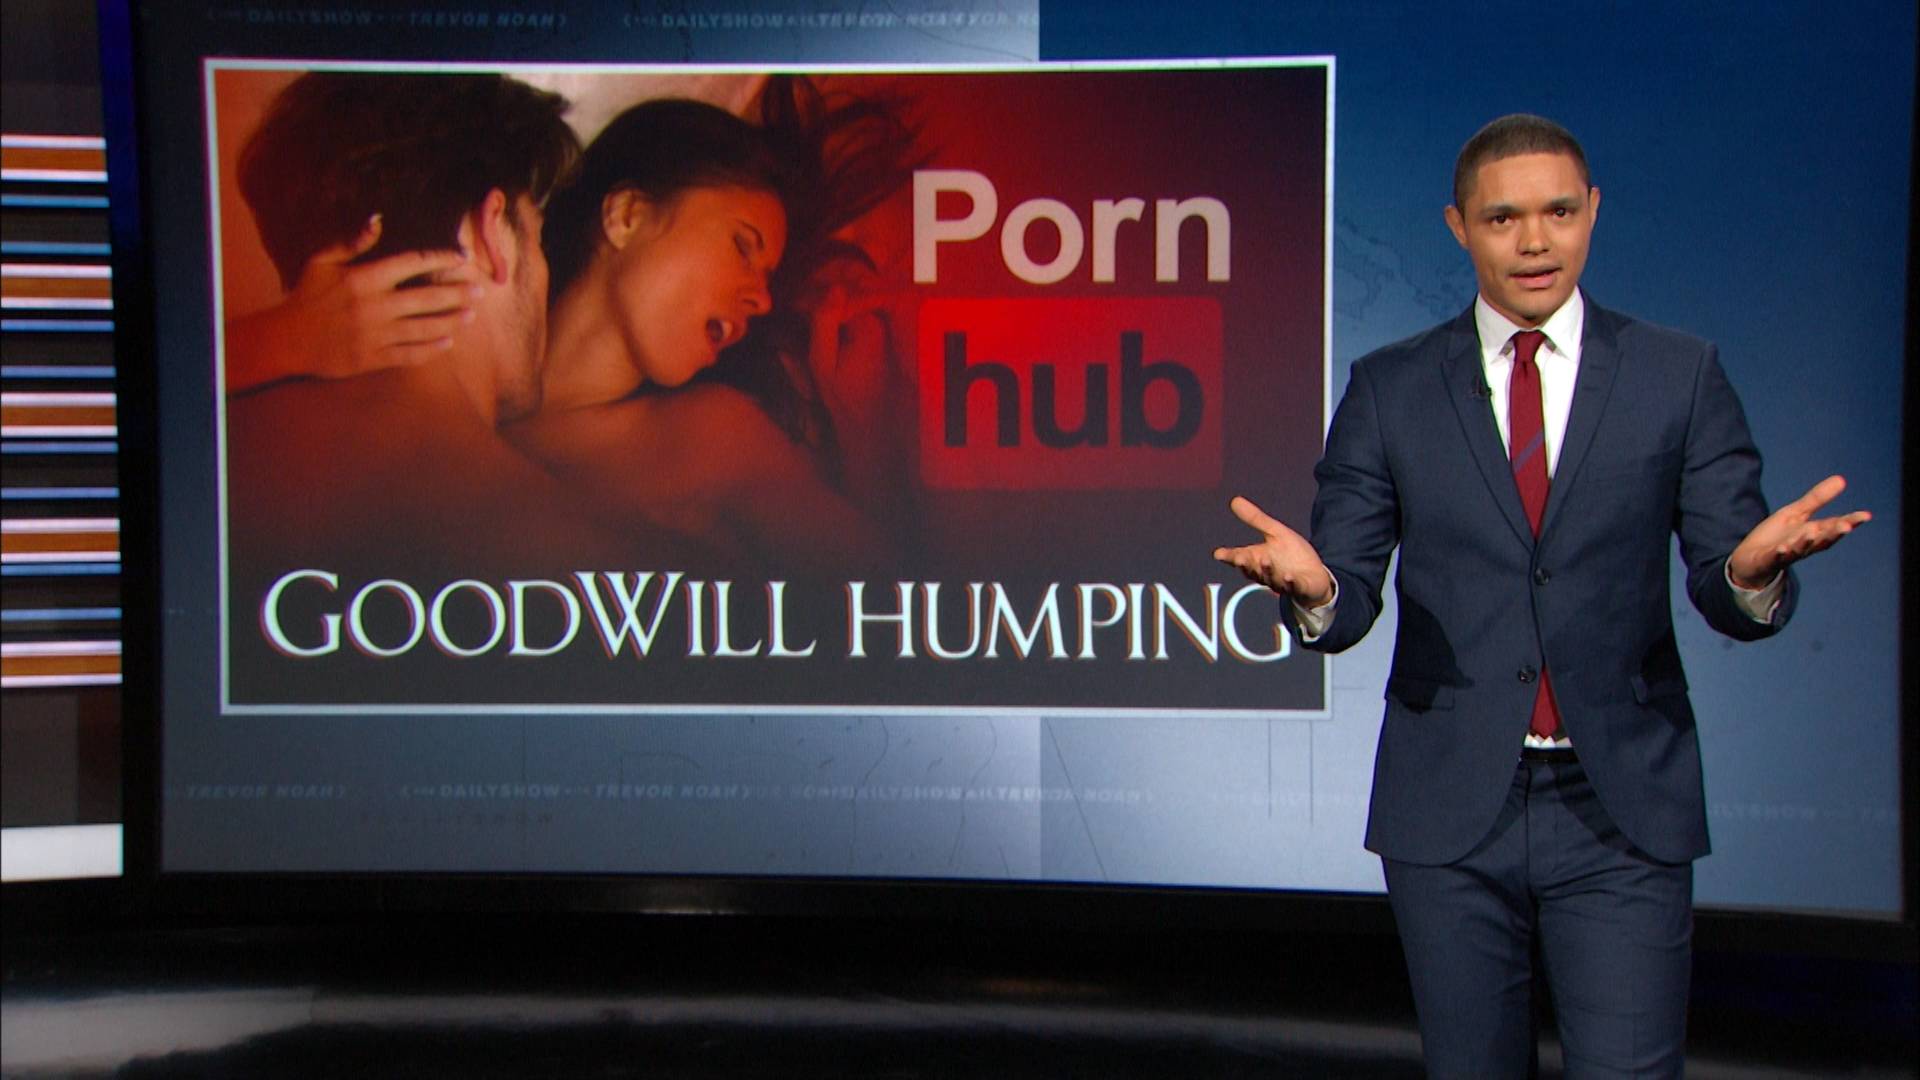 Pornhub Saves the Whales - The Daily Show with Trevor Noah (Video Clip) |  Comedy Central US